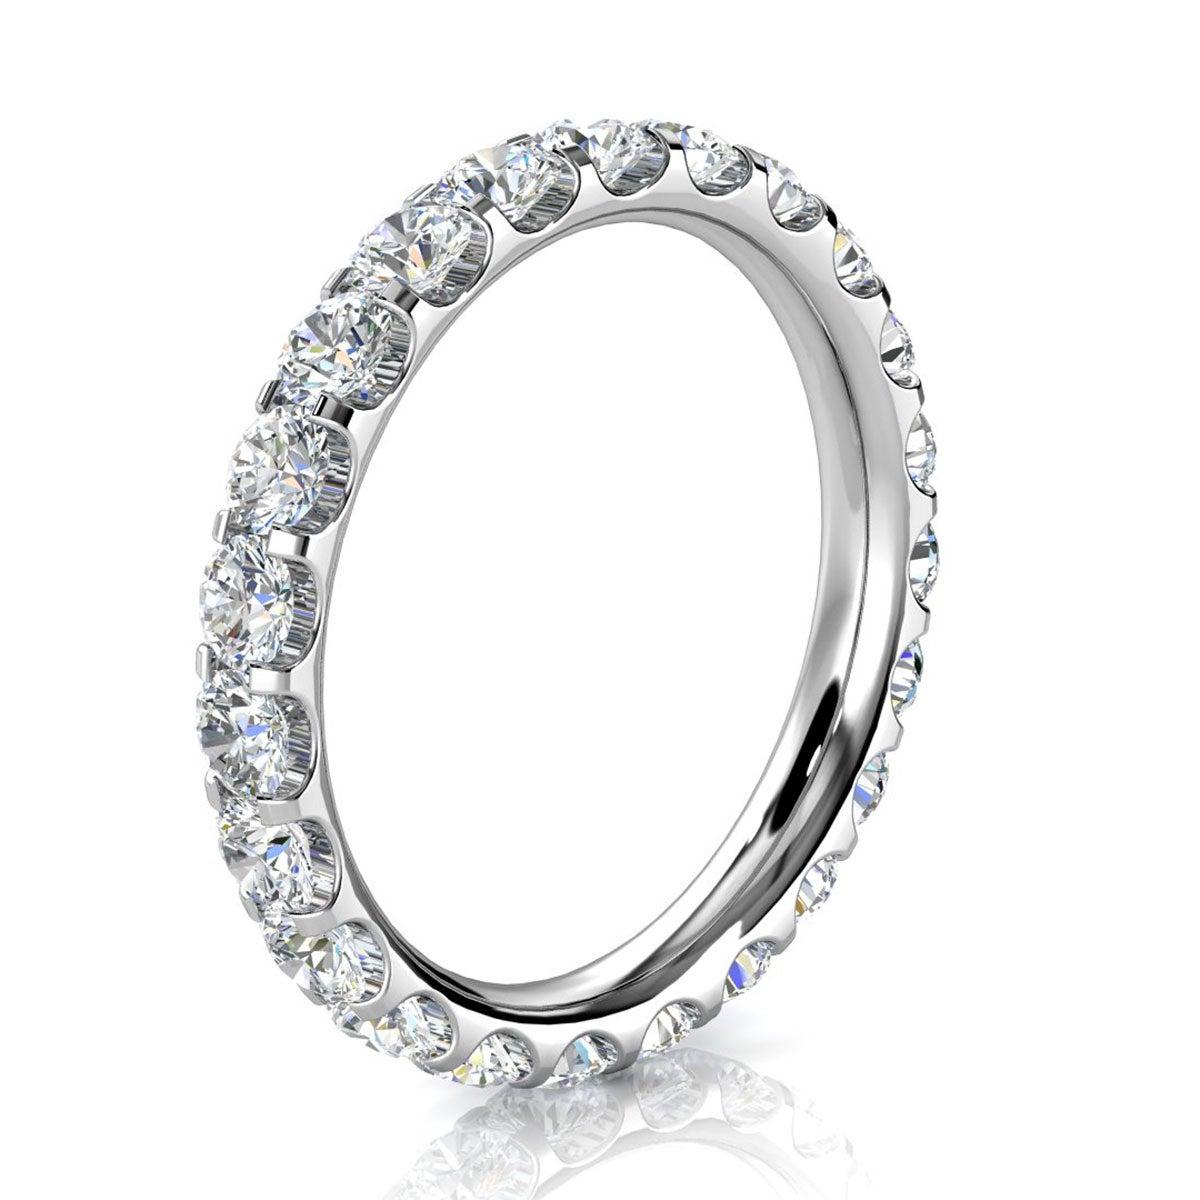 For Sale:  18k White Gold Viola Eternity Micro-Prong Diamond Ring '1 1/2 Ct. tw' 2